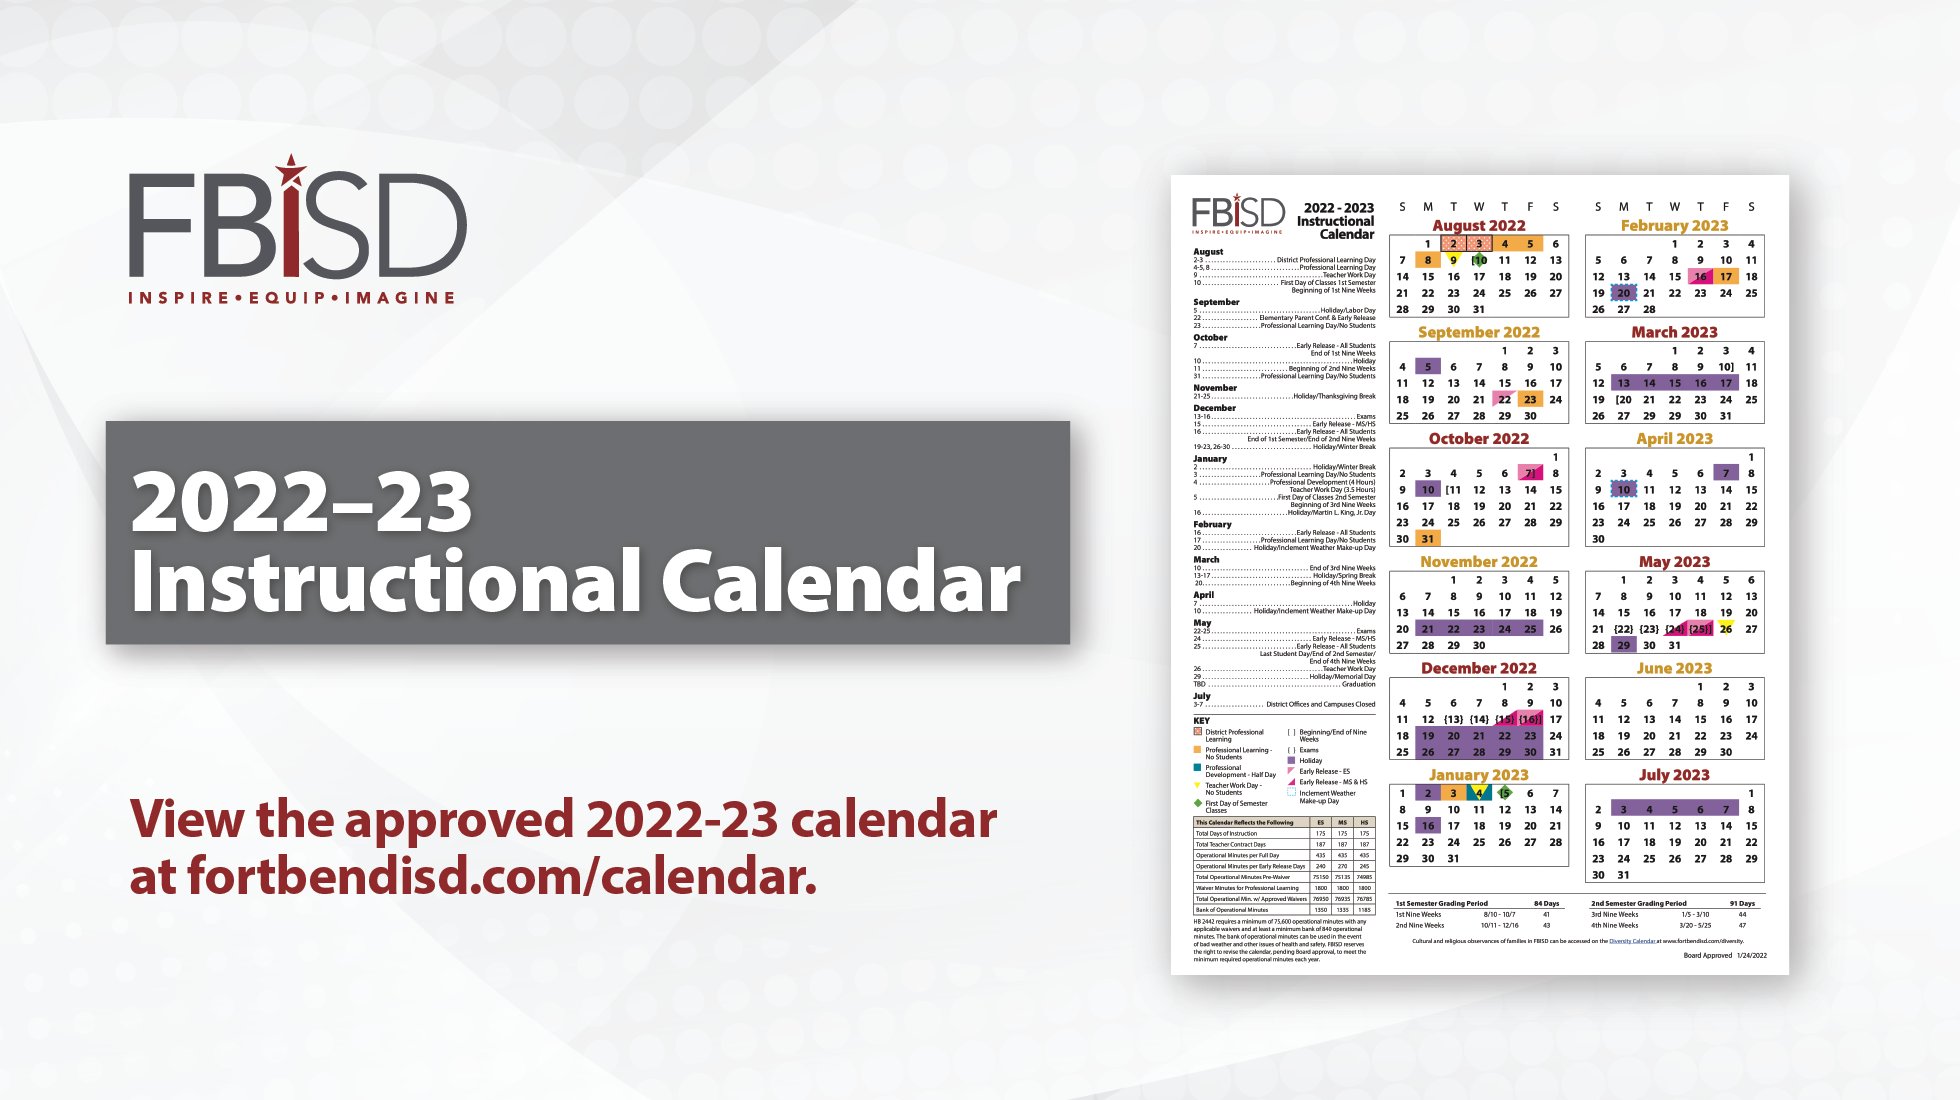 Fort Bend Isd Calendar 2022 23 Fort Bend Isd On Twitter: "The 2022-23 Instructional Calendar Has Been  Approved By The Fort Bend Isd Board Of Trustees. 📅 View The Approved 2022-23  Calendar At Https://T.co/Sussnjxanh. Https://T.co/Y4Gaewjwxc" / Twitter